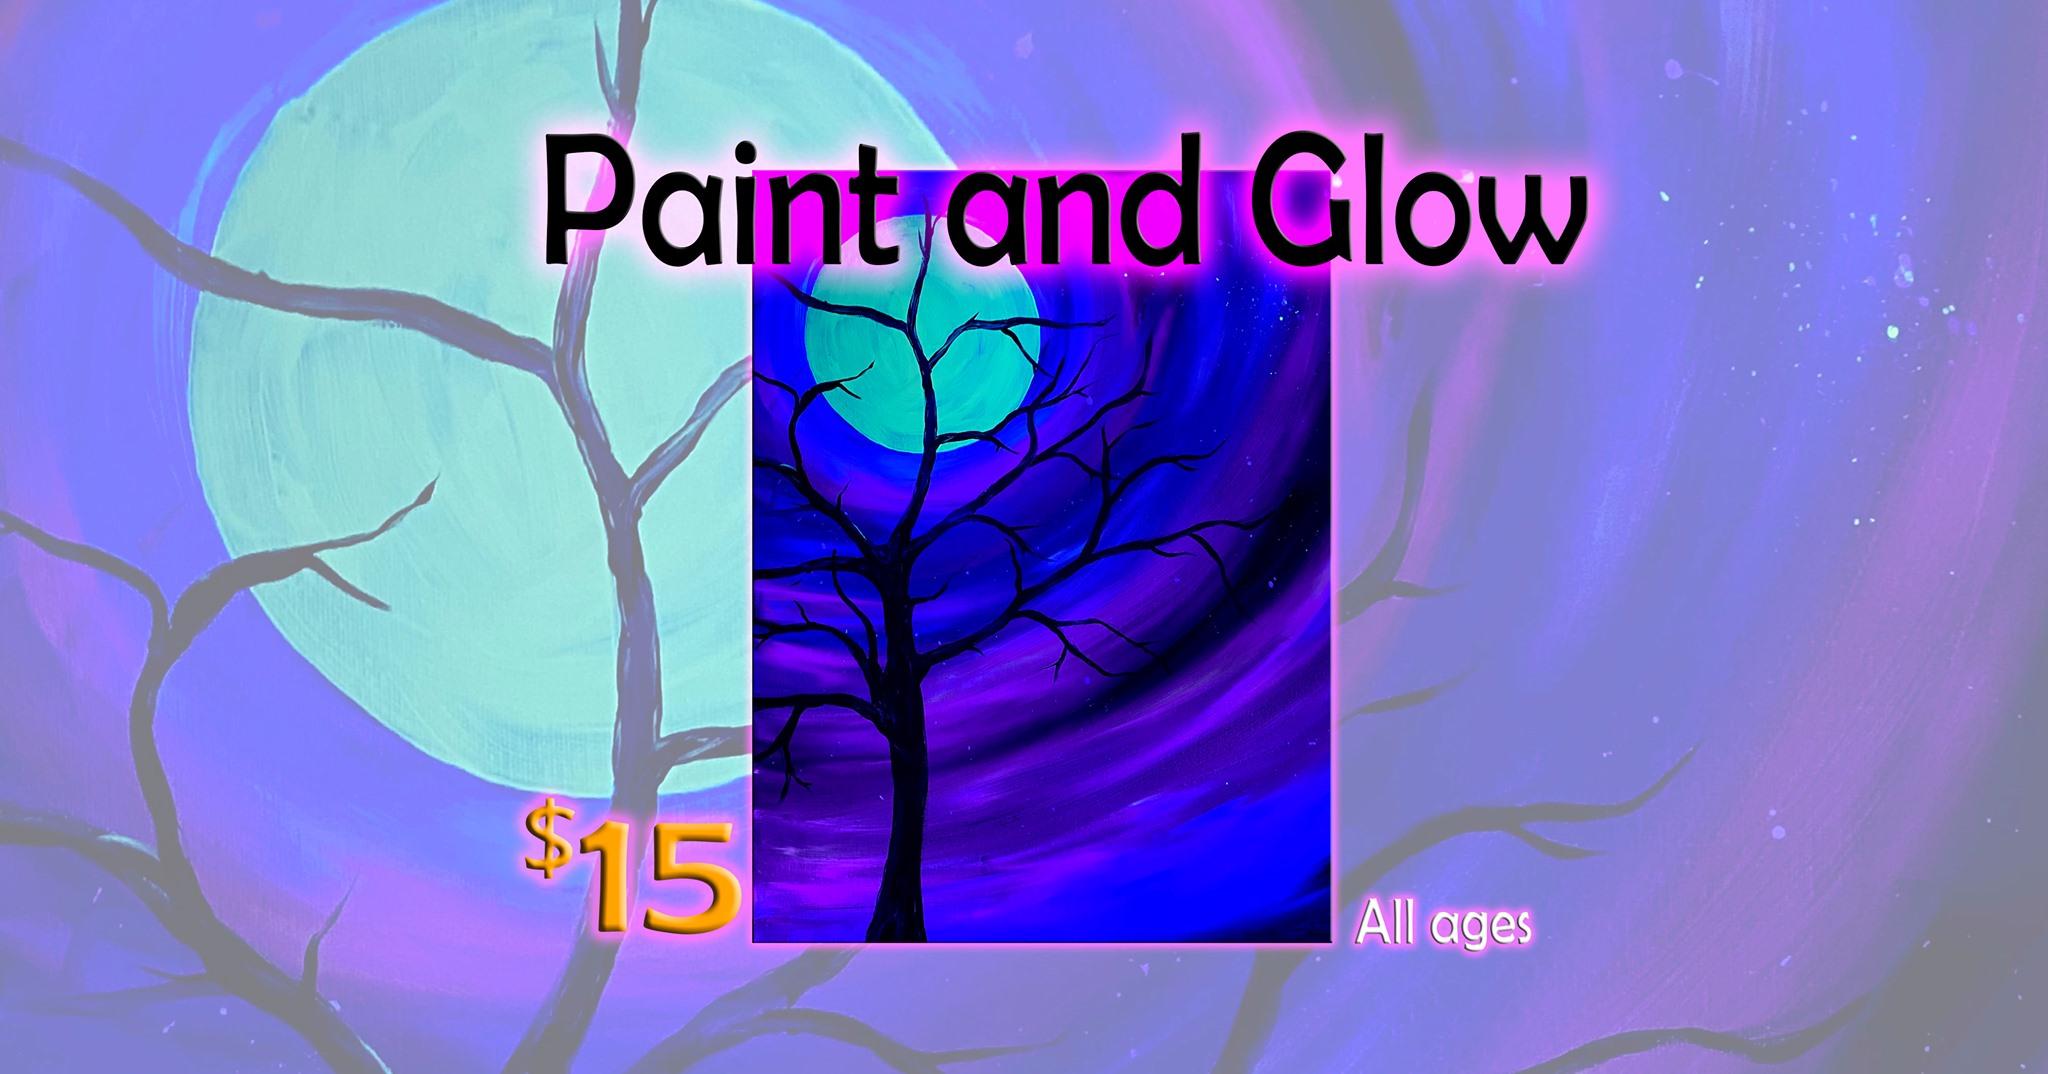 February Moon painting for all ages under black light